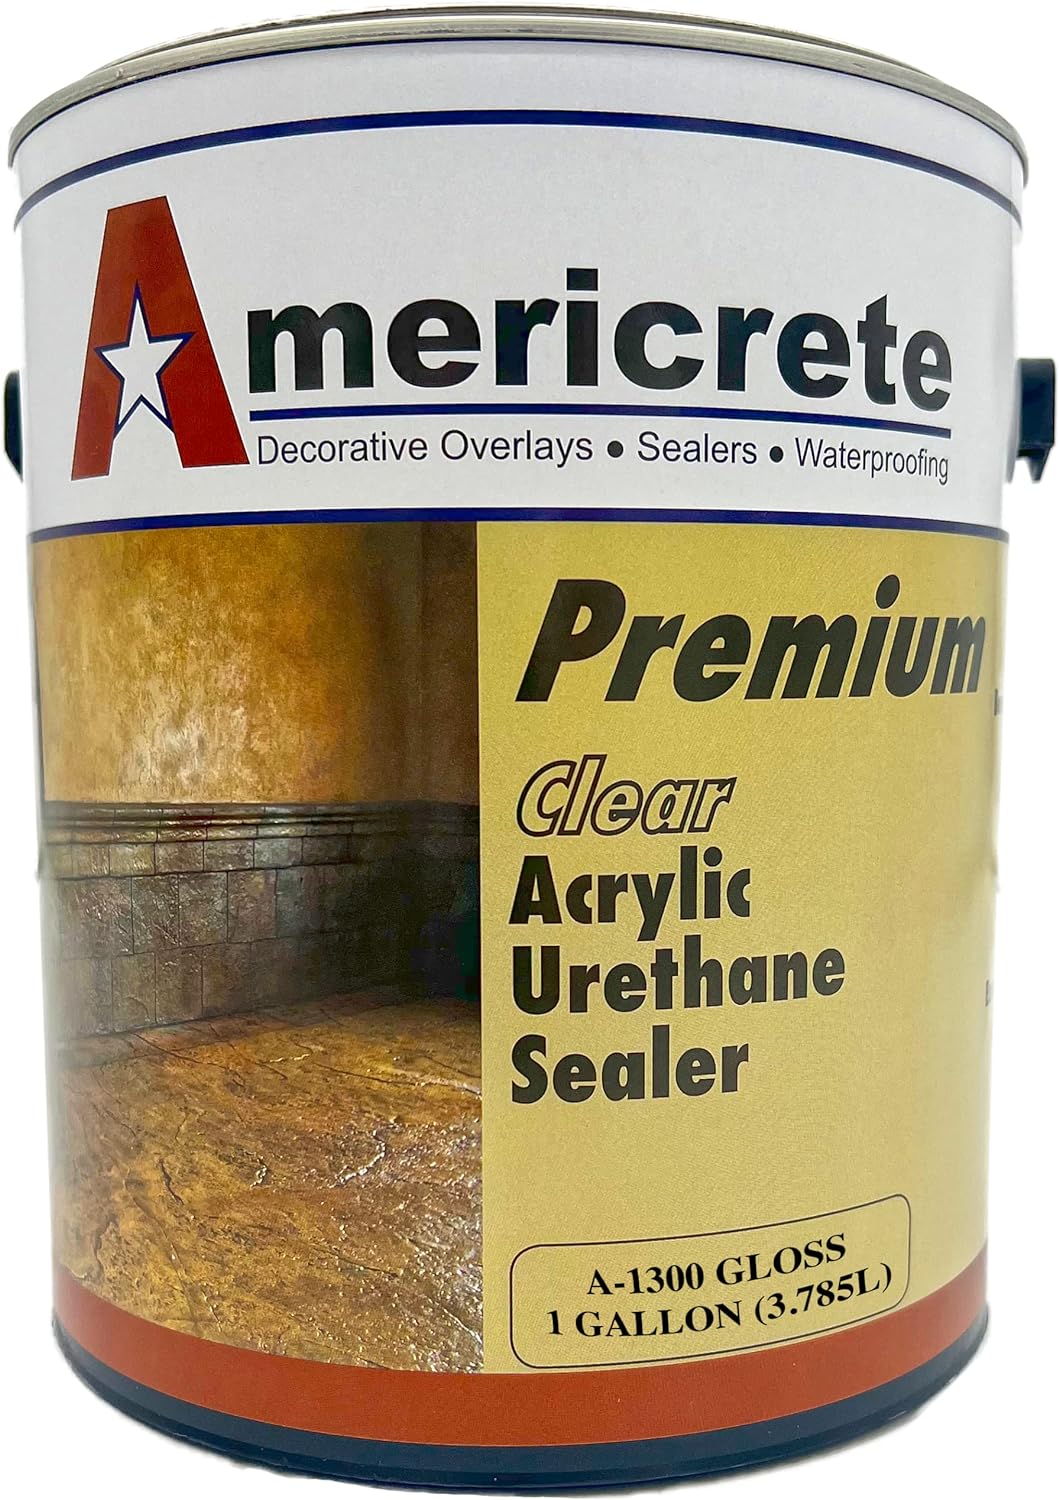 Americrete A-1300 Clear Glossy Concrete Sealer - Transparent Waterproofing for Floors, Driveways, Garages, Cinderblocks, Sandstone, Sidewalks, and Other Interior or Exterior Cement (1 & 5 Gallons